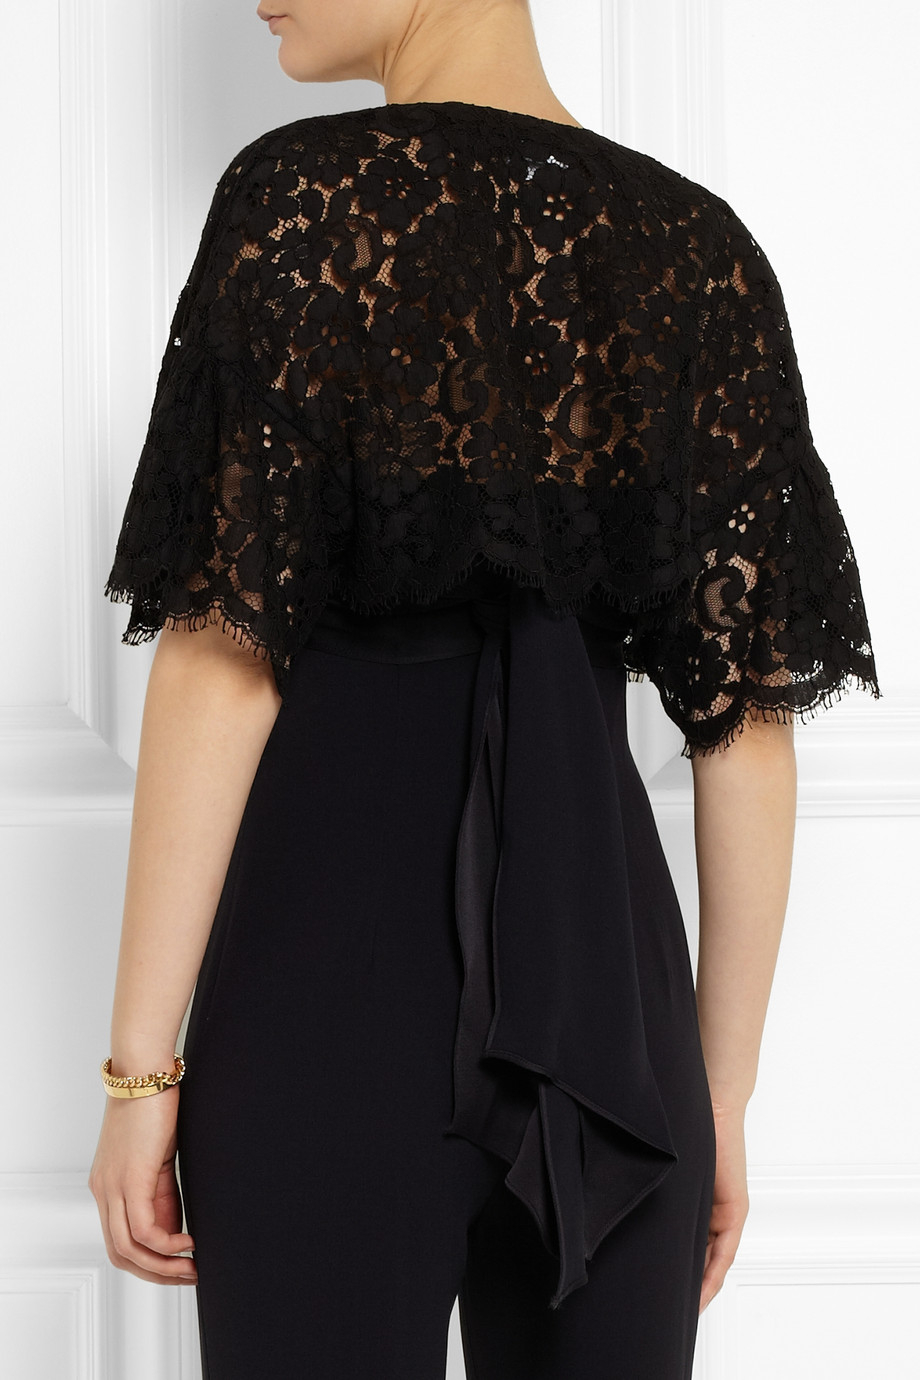 Lyst - Dolce & Gabbana Cropped Cottonblend Lace Jacket in Black